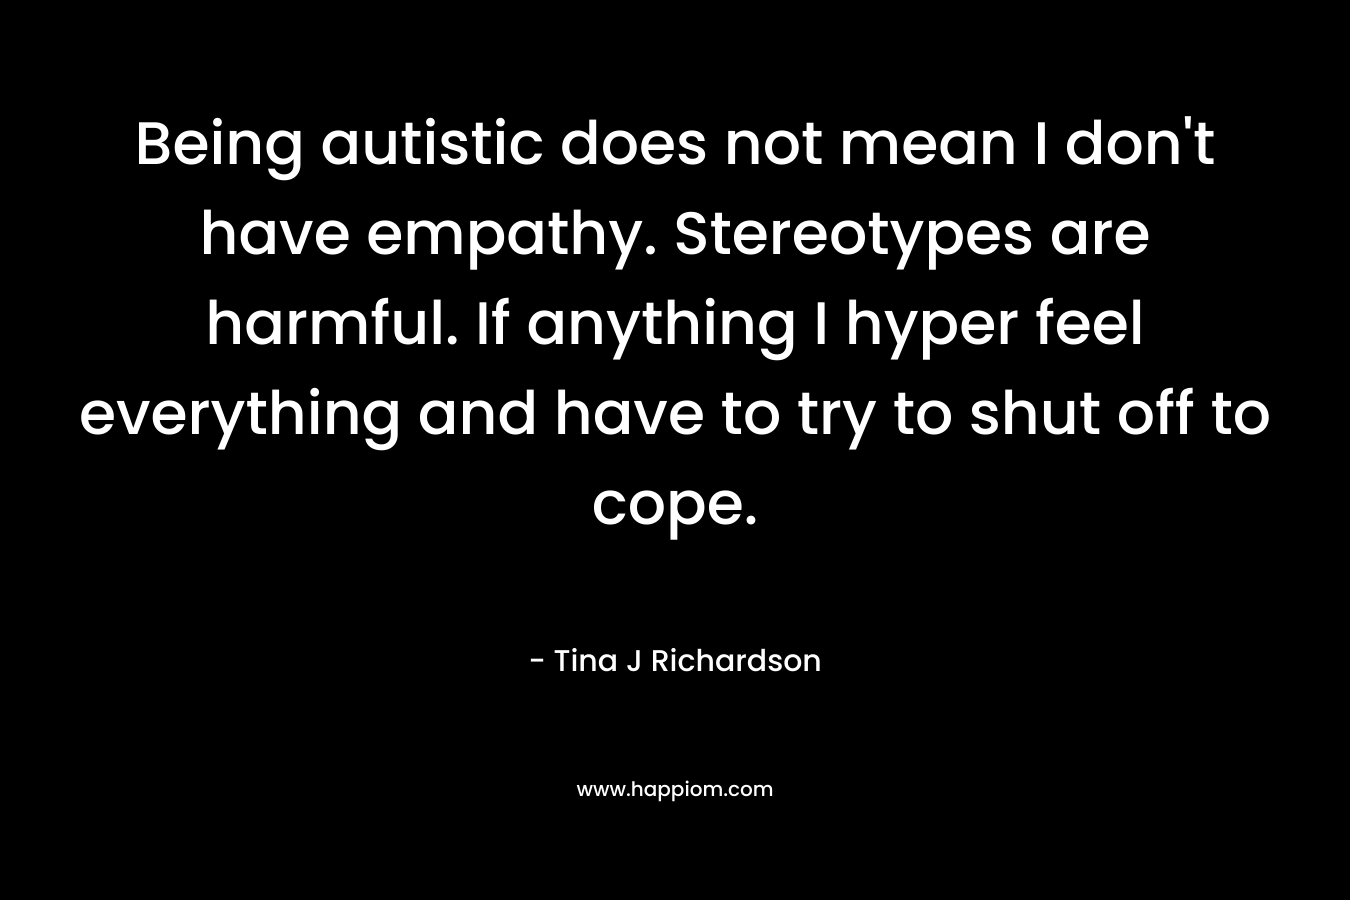 Being autistic does not mean I don’t have empathy. Stereotypes are harmful. If anything I hyper feel everything and have to try to shut off to cope. – Tina J Richardson